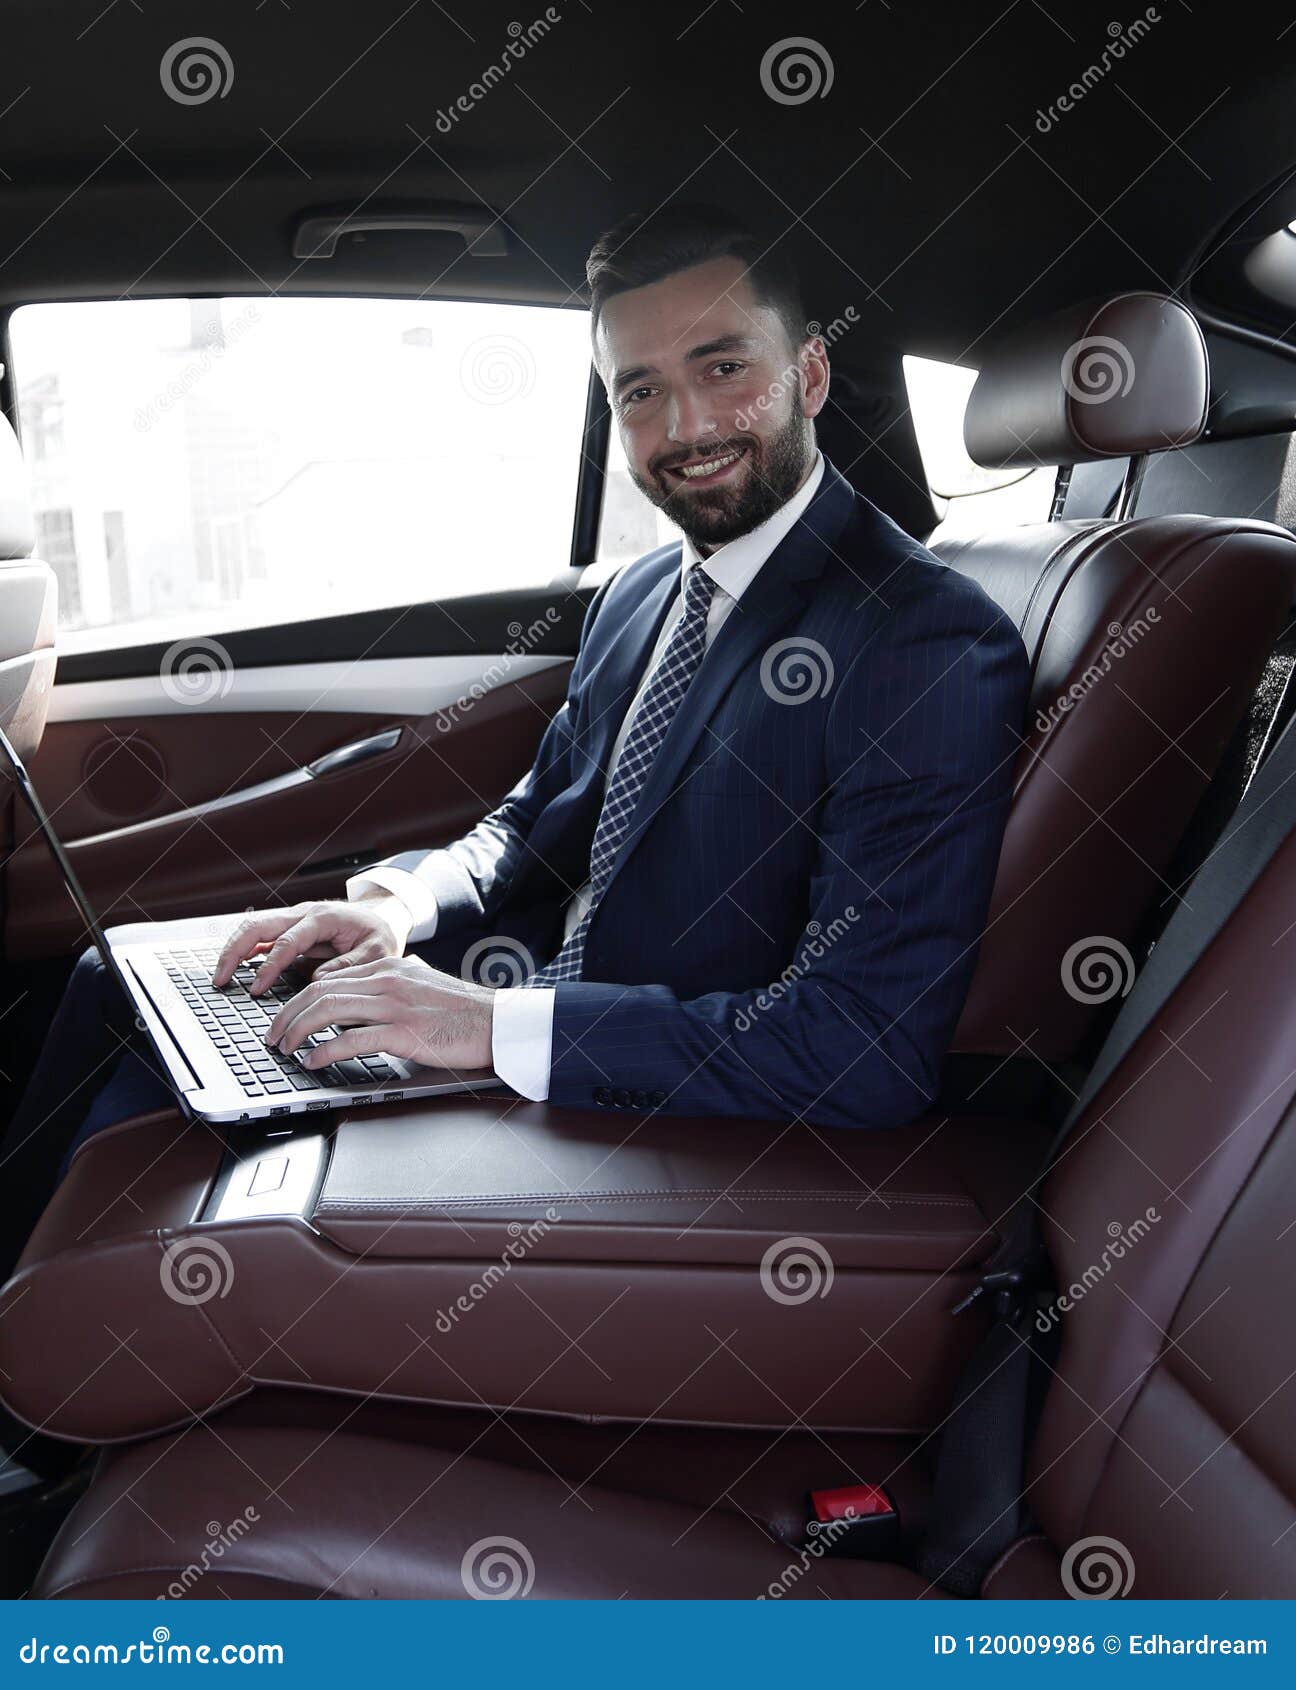 Smiling Businessman Sitting In The Back Seat Of A Prestigious Car Stock